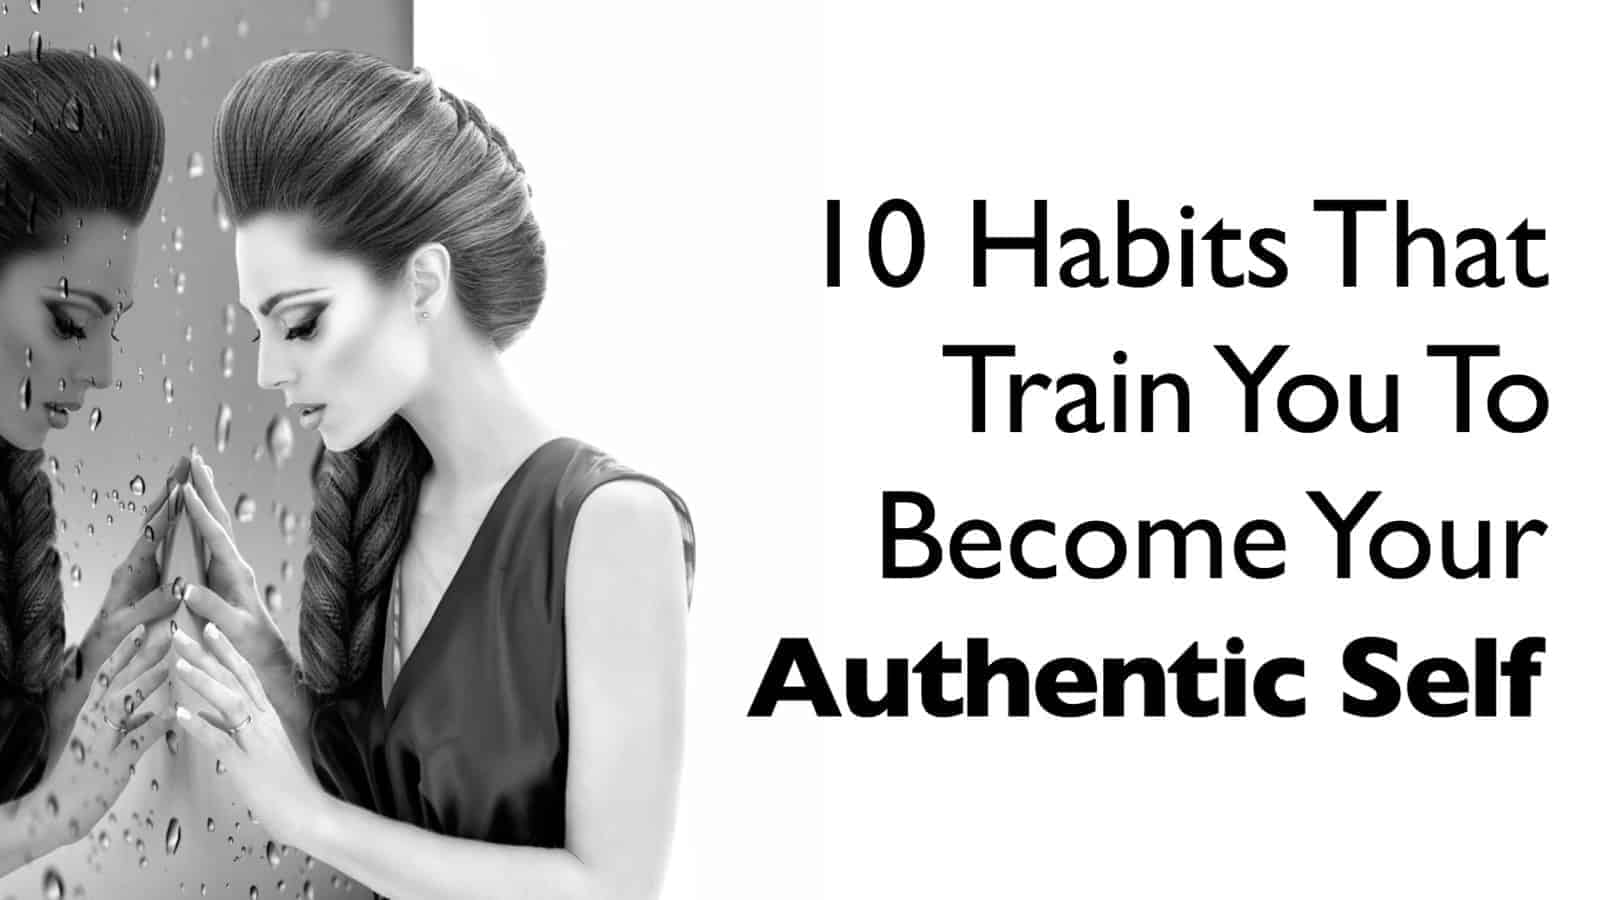 10 Habits To Develop If You Want To Be Your Authentic Self